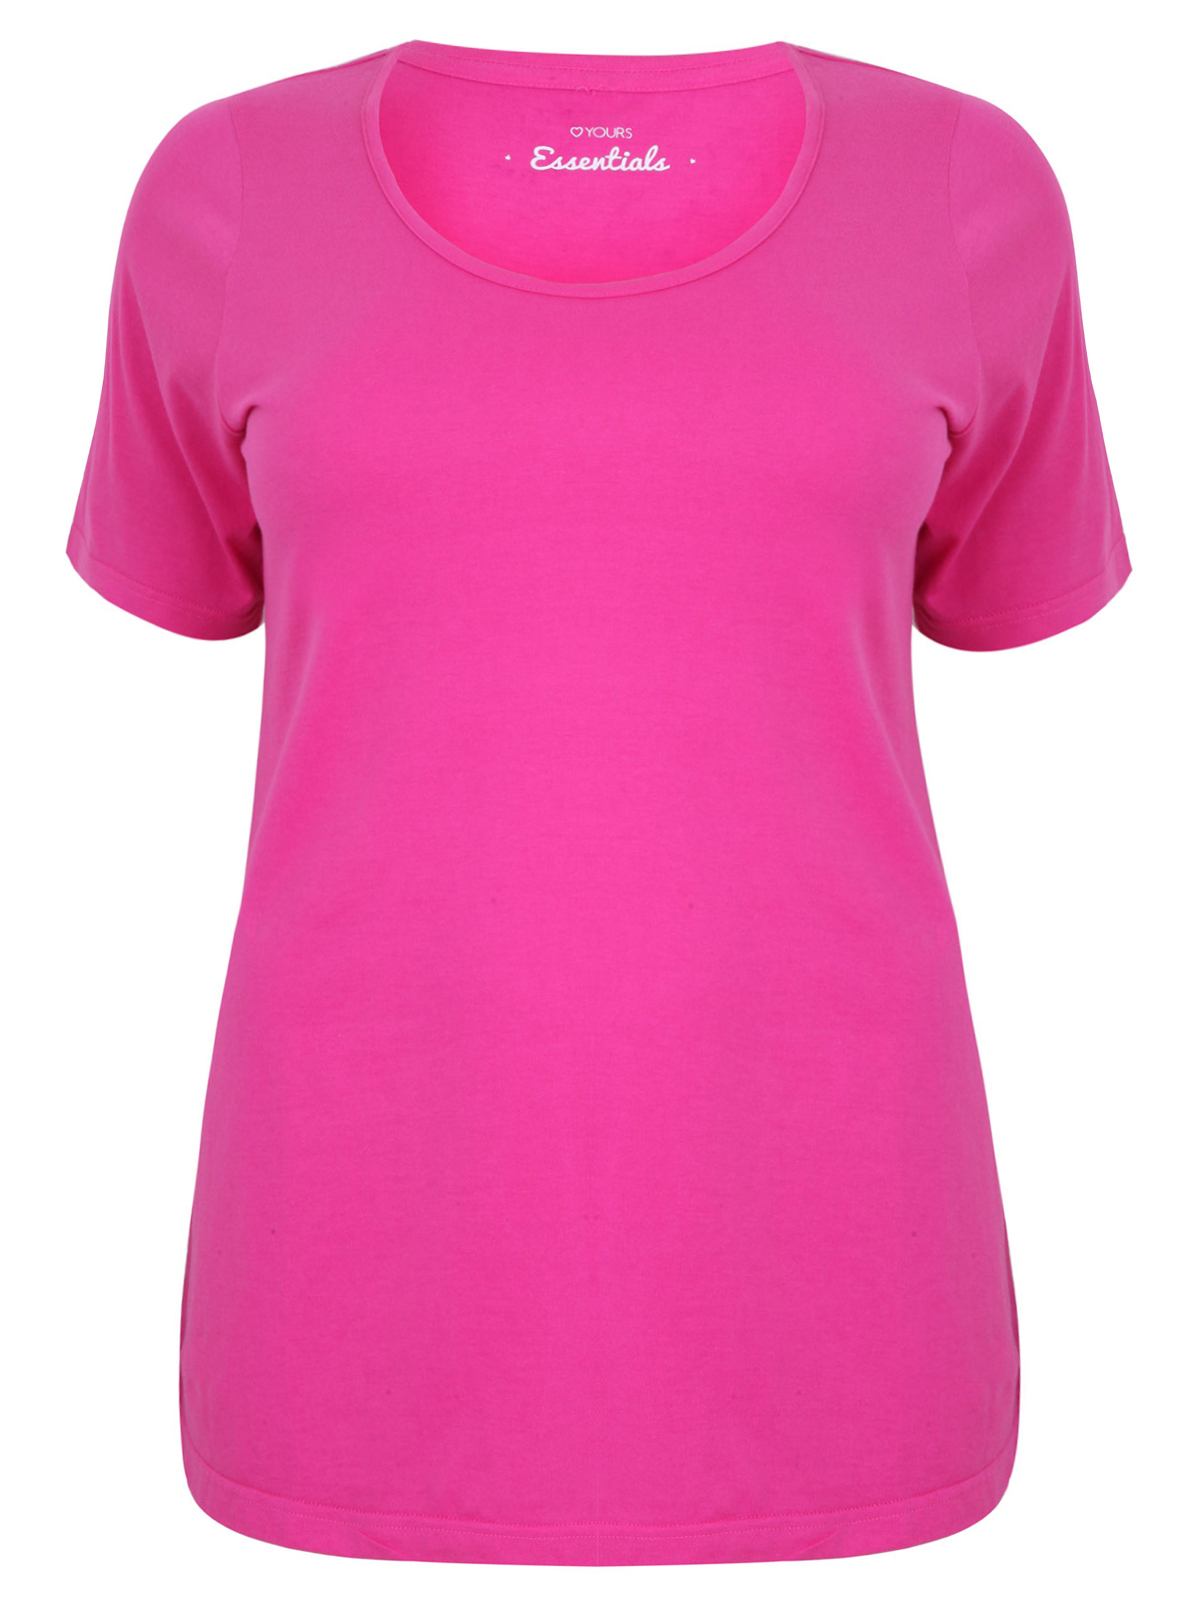 CURVE - - Yours HOT-PINK Short Sleeve Pure Cotton Scoop Neck T-Shirt ...